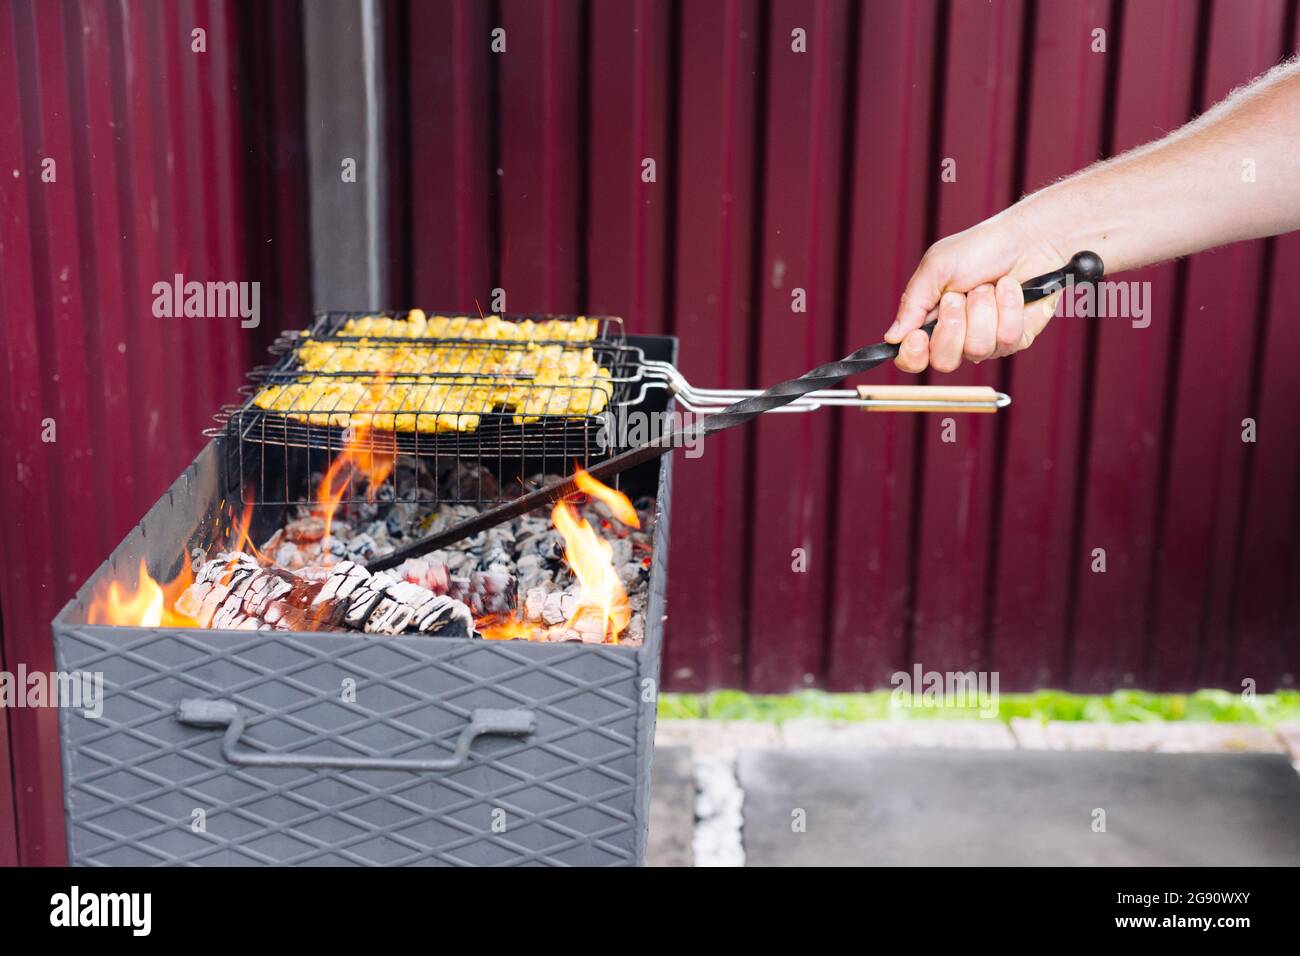 A man using a poker straightens the coals in the grill Stock Photo